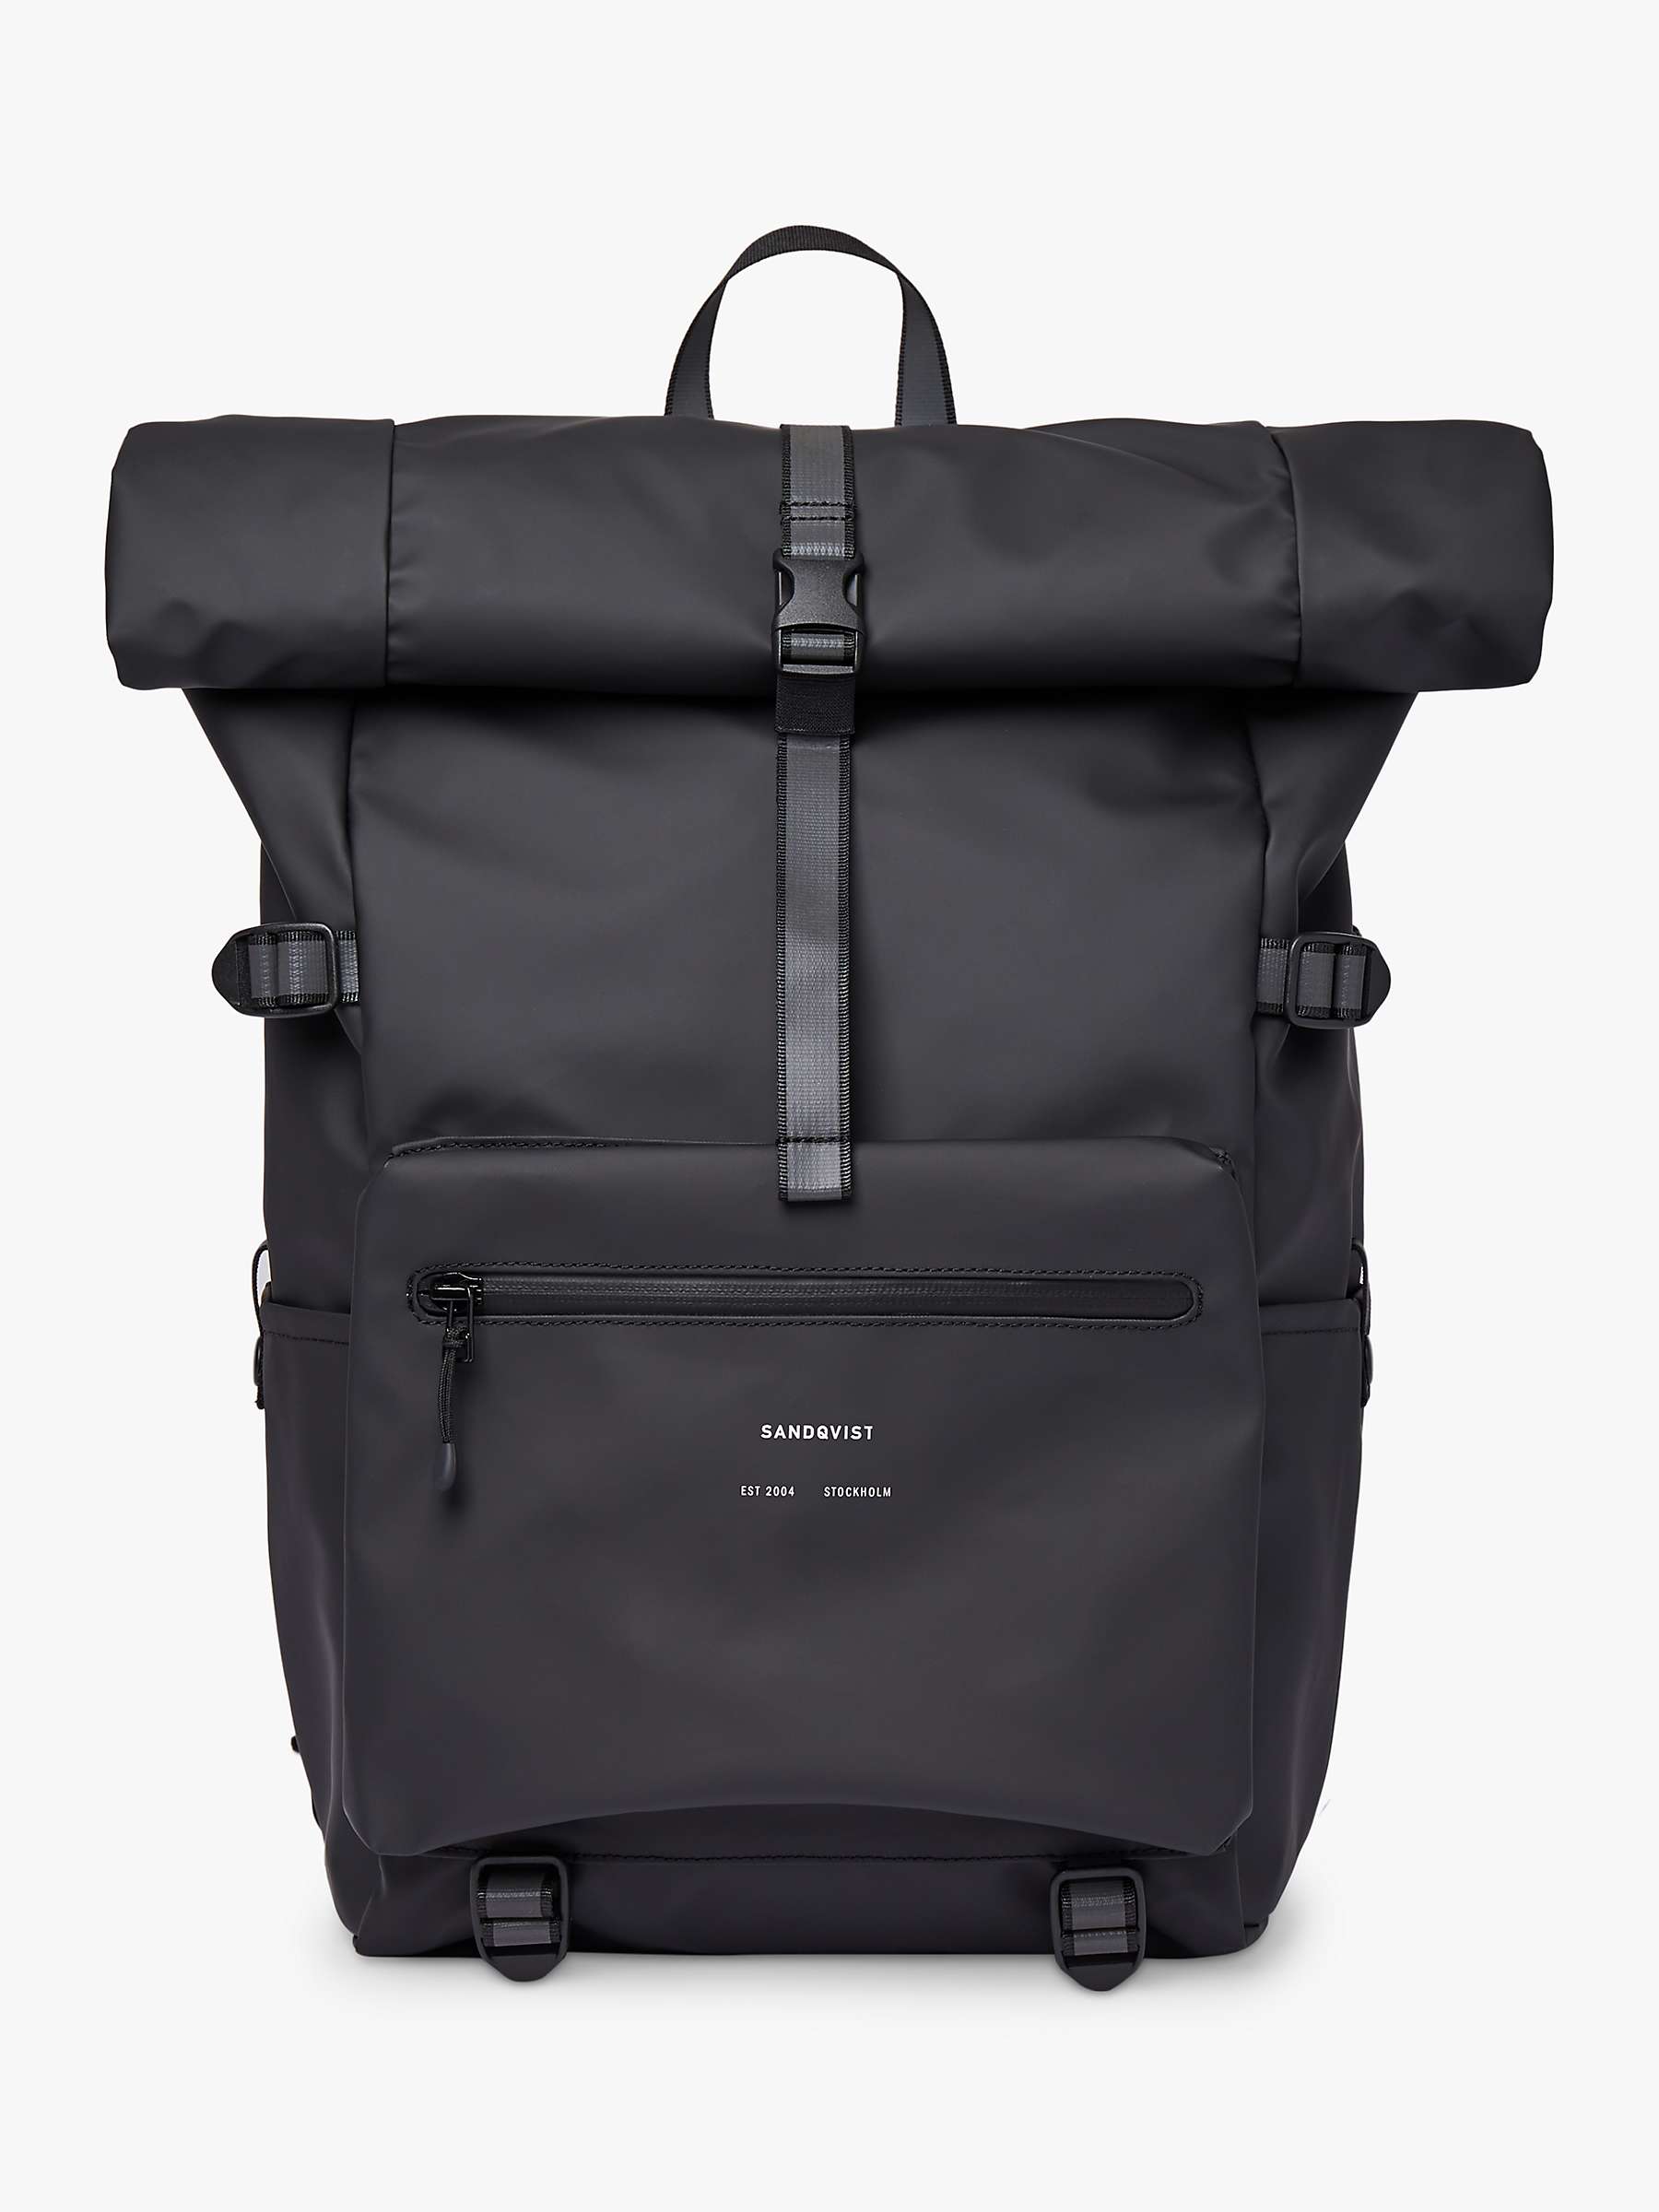 Buy Sandqvist Ruben 2.0 Recycled Roll Top Backpack Online at johnlewis.com